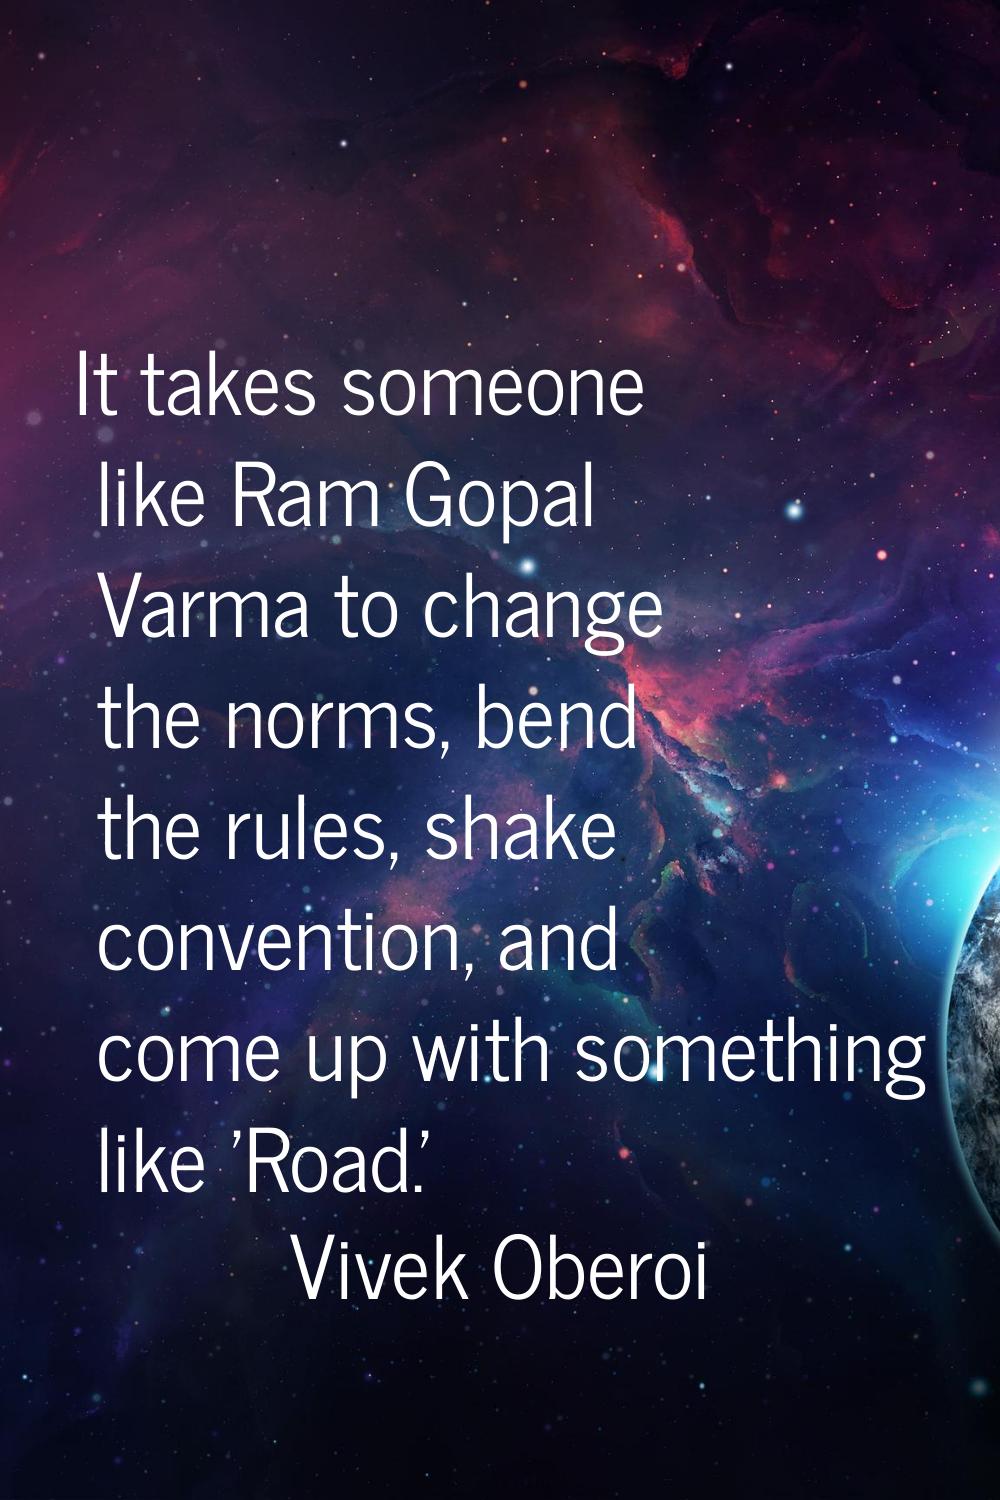 It takes someone like Ram Gopal Varma to change the norms, bend the rules, shake convention, and co